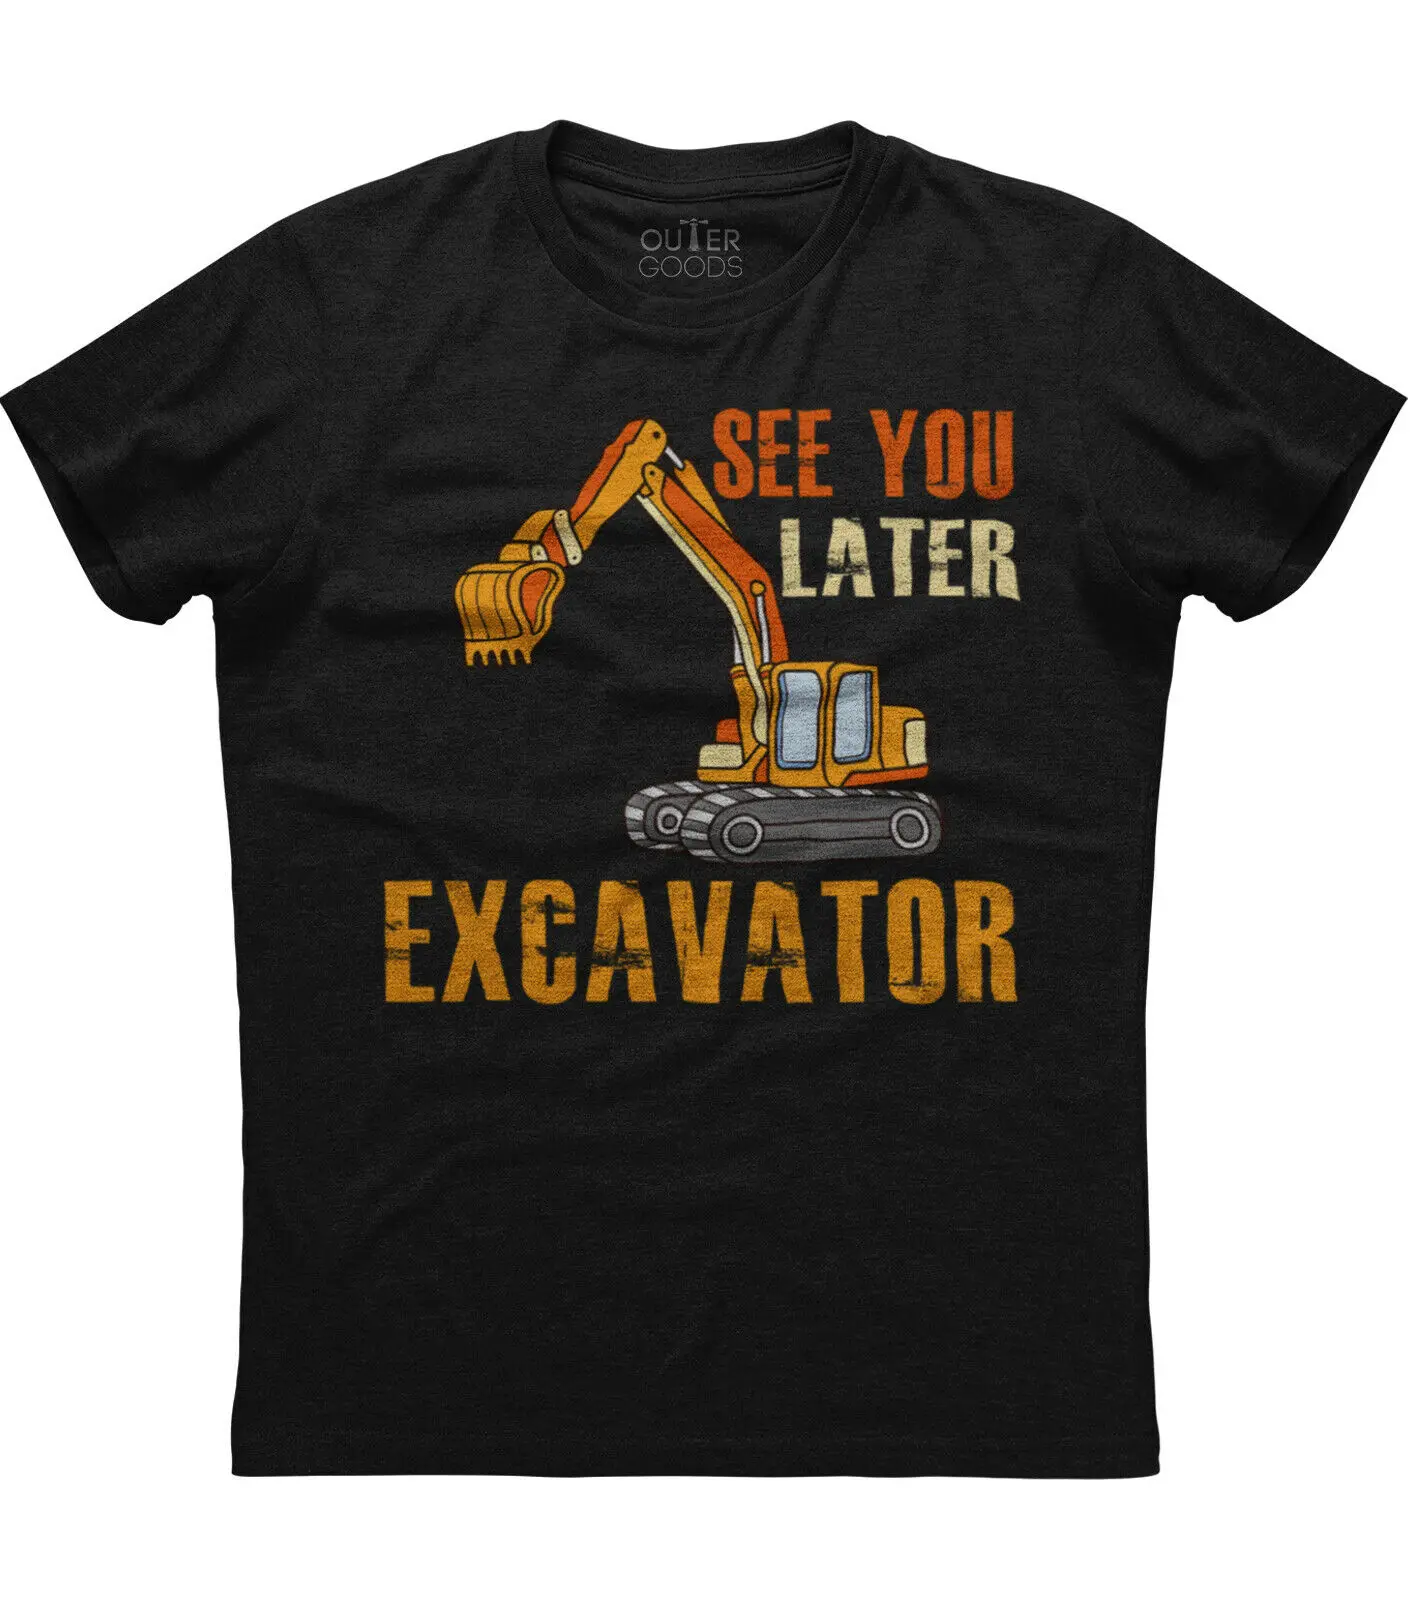 

See You Later Excavator Funny Graphic Phrase T-Shirt. Summer Cotton O-Neck Short Sleeve Mens T Shirt New S-3XL